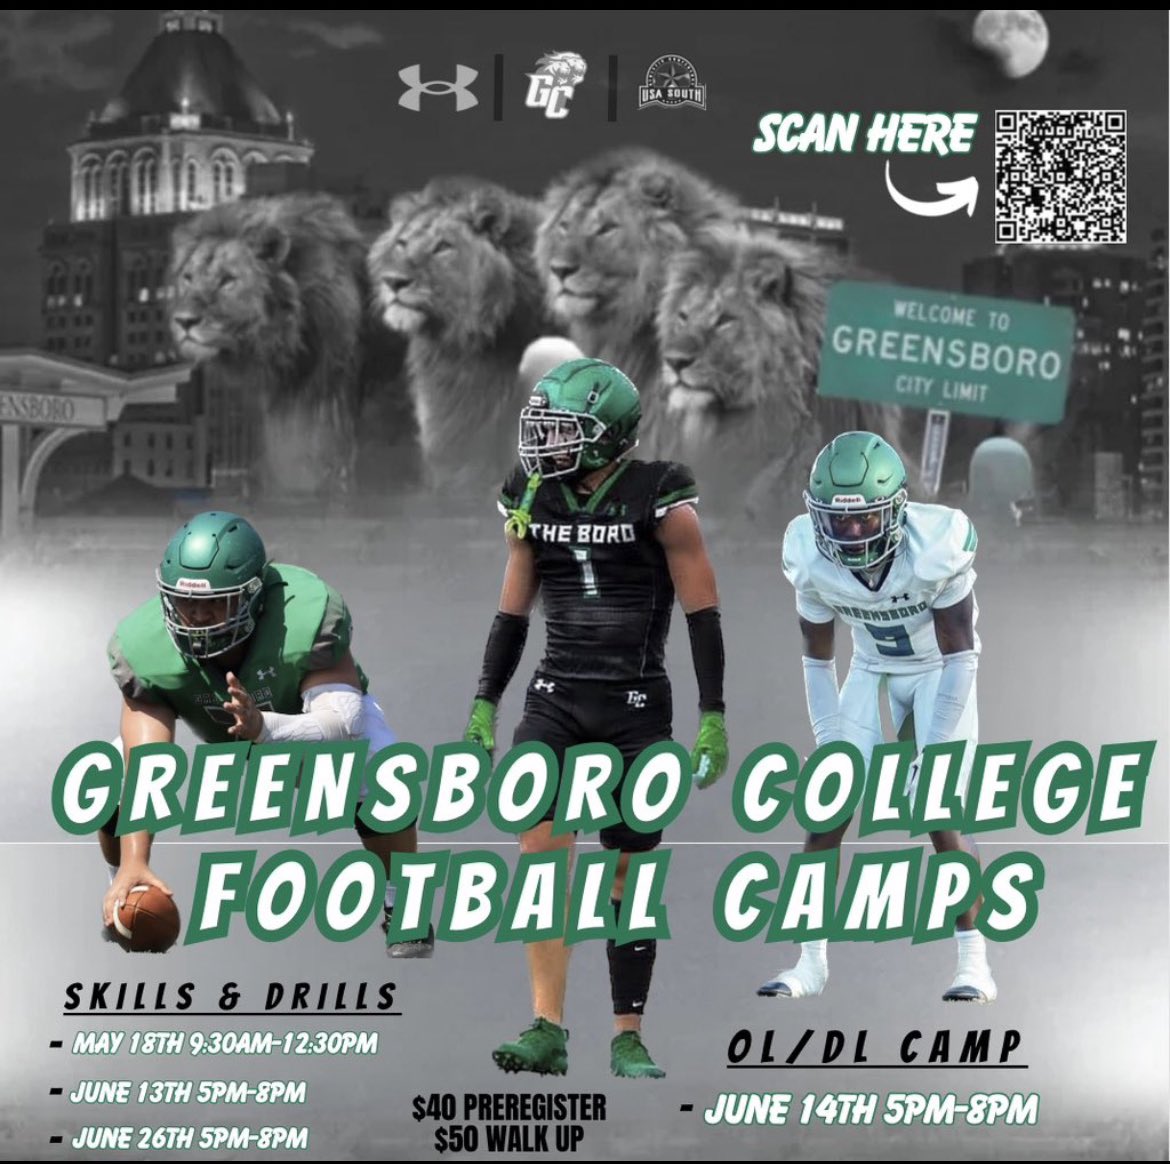 25s, it’s your turn! 👀 Make sure to fill out our recruiting questionnaire and check out our camp dates for this summer, so you can come showcase your skills. linktr.ee/gcfootball Whose Bringing the Juice to The Boro❔❕🦁